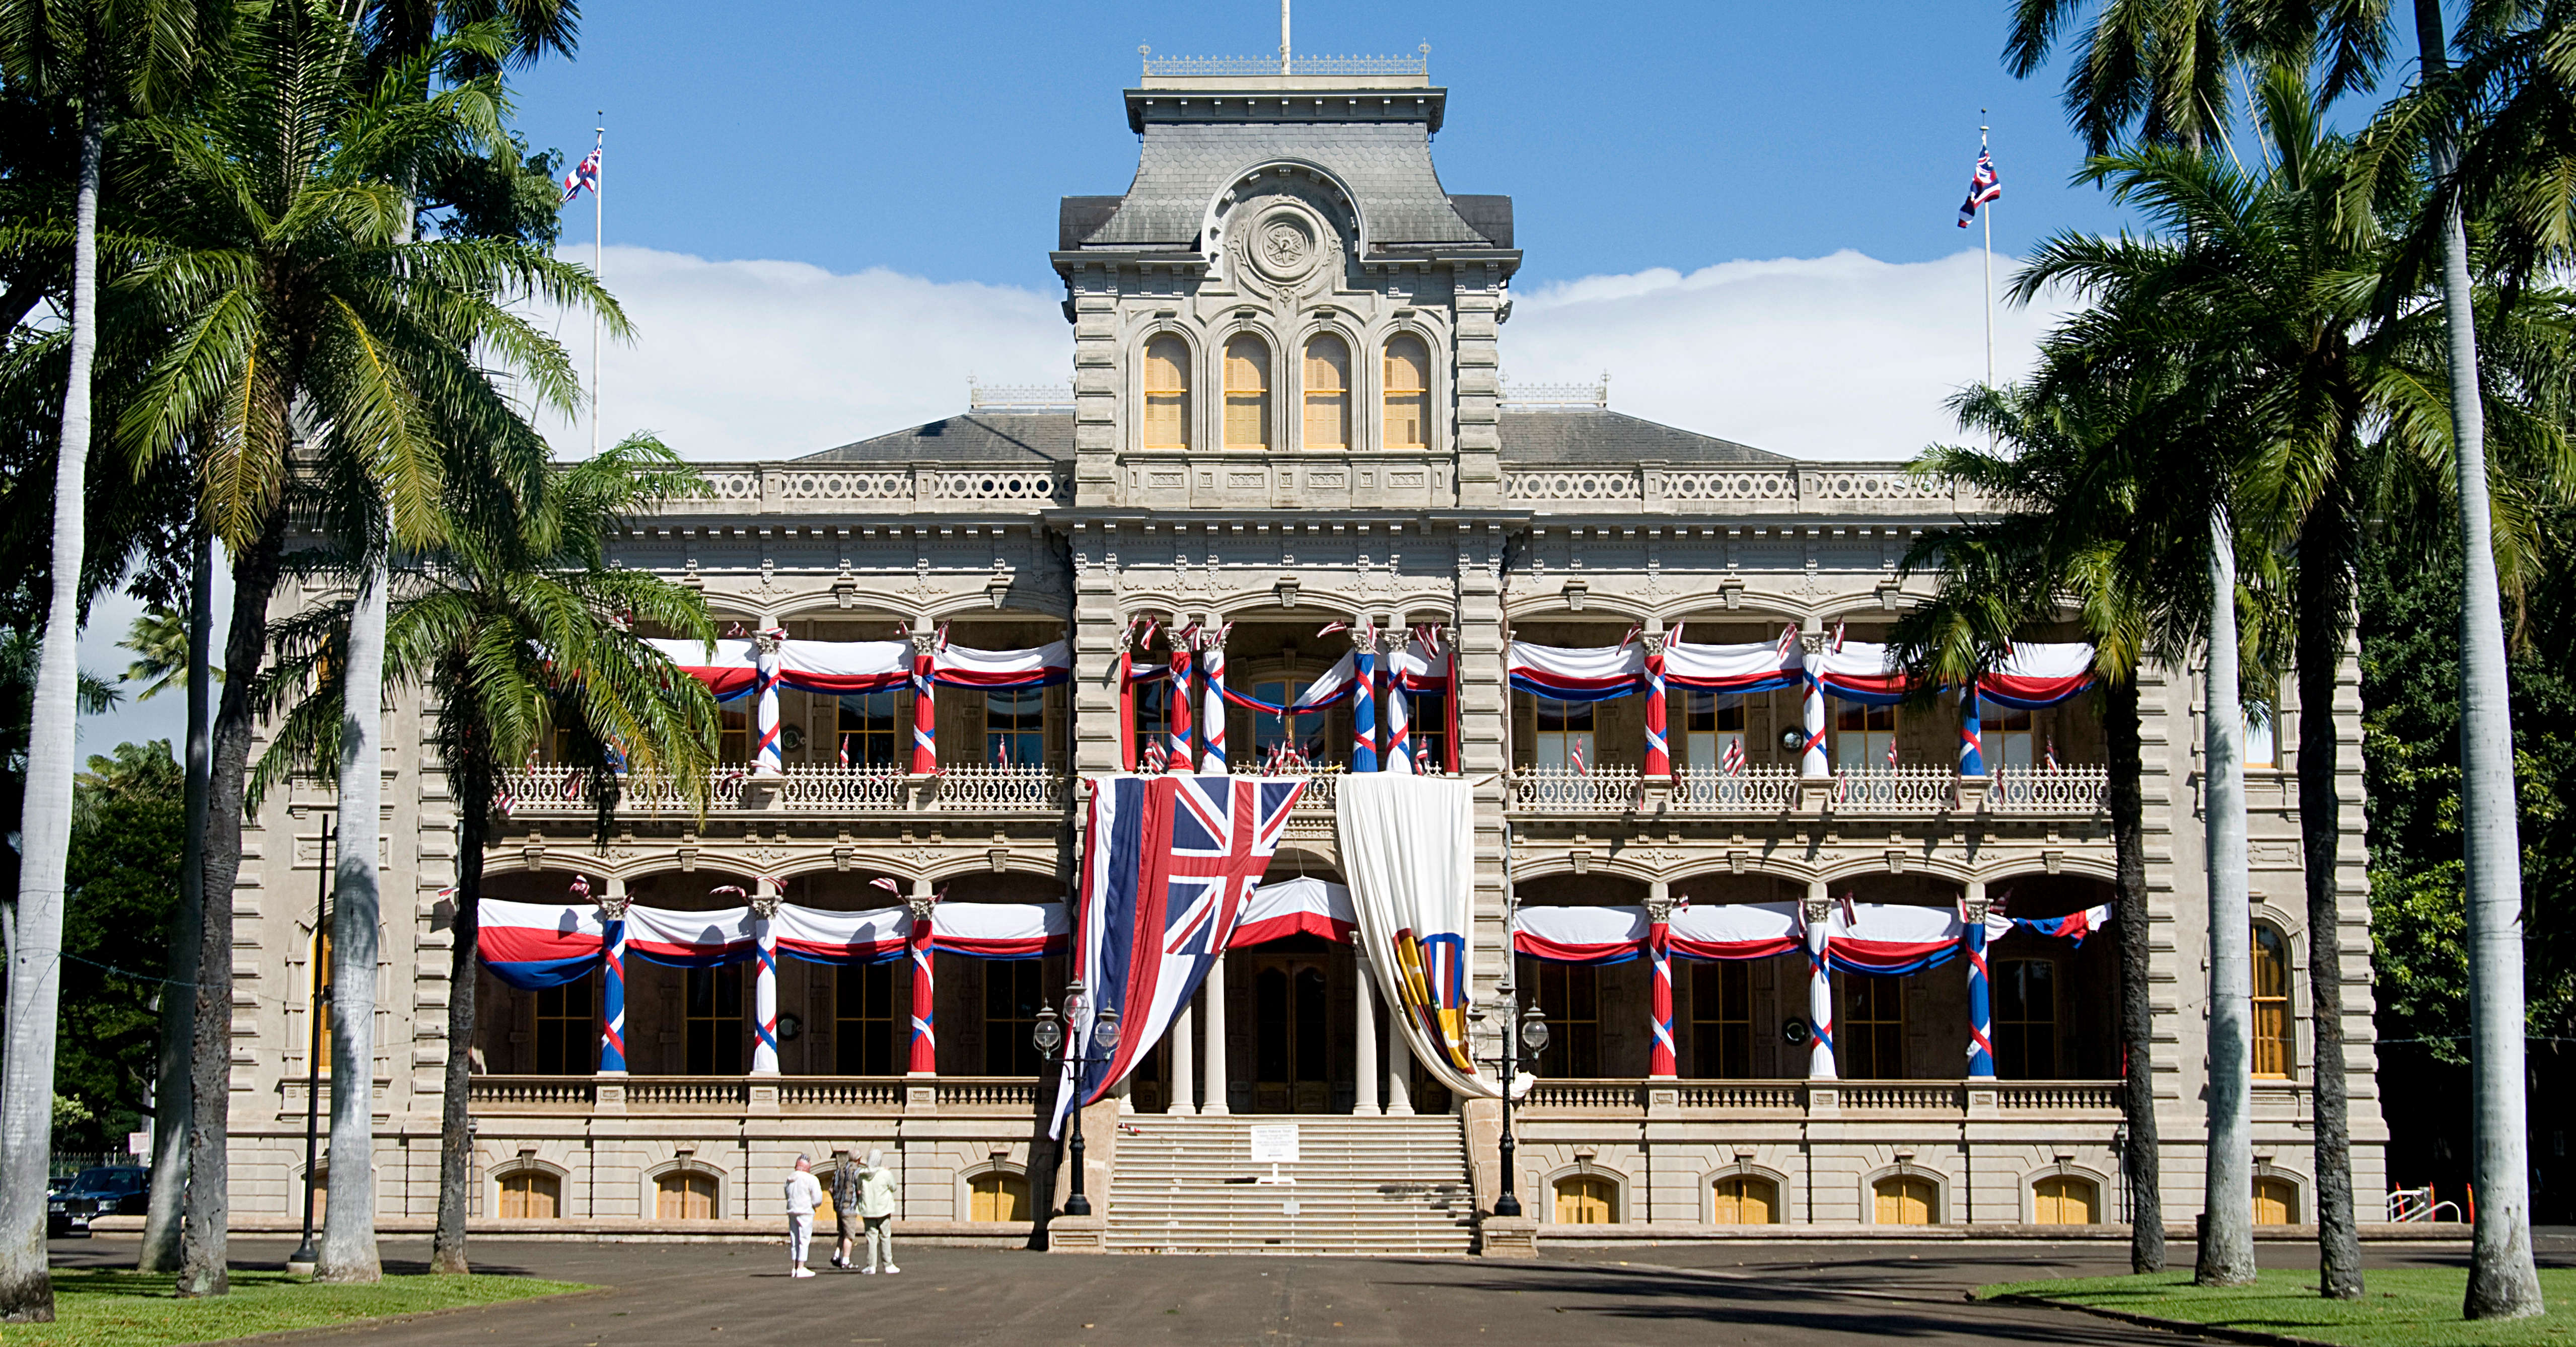 The 'Iolani Palace was home to the Hawaiian royal family for just over a decade. Image by Linda Ching / Getty Images